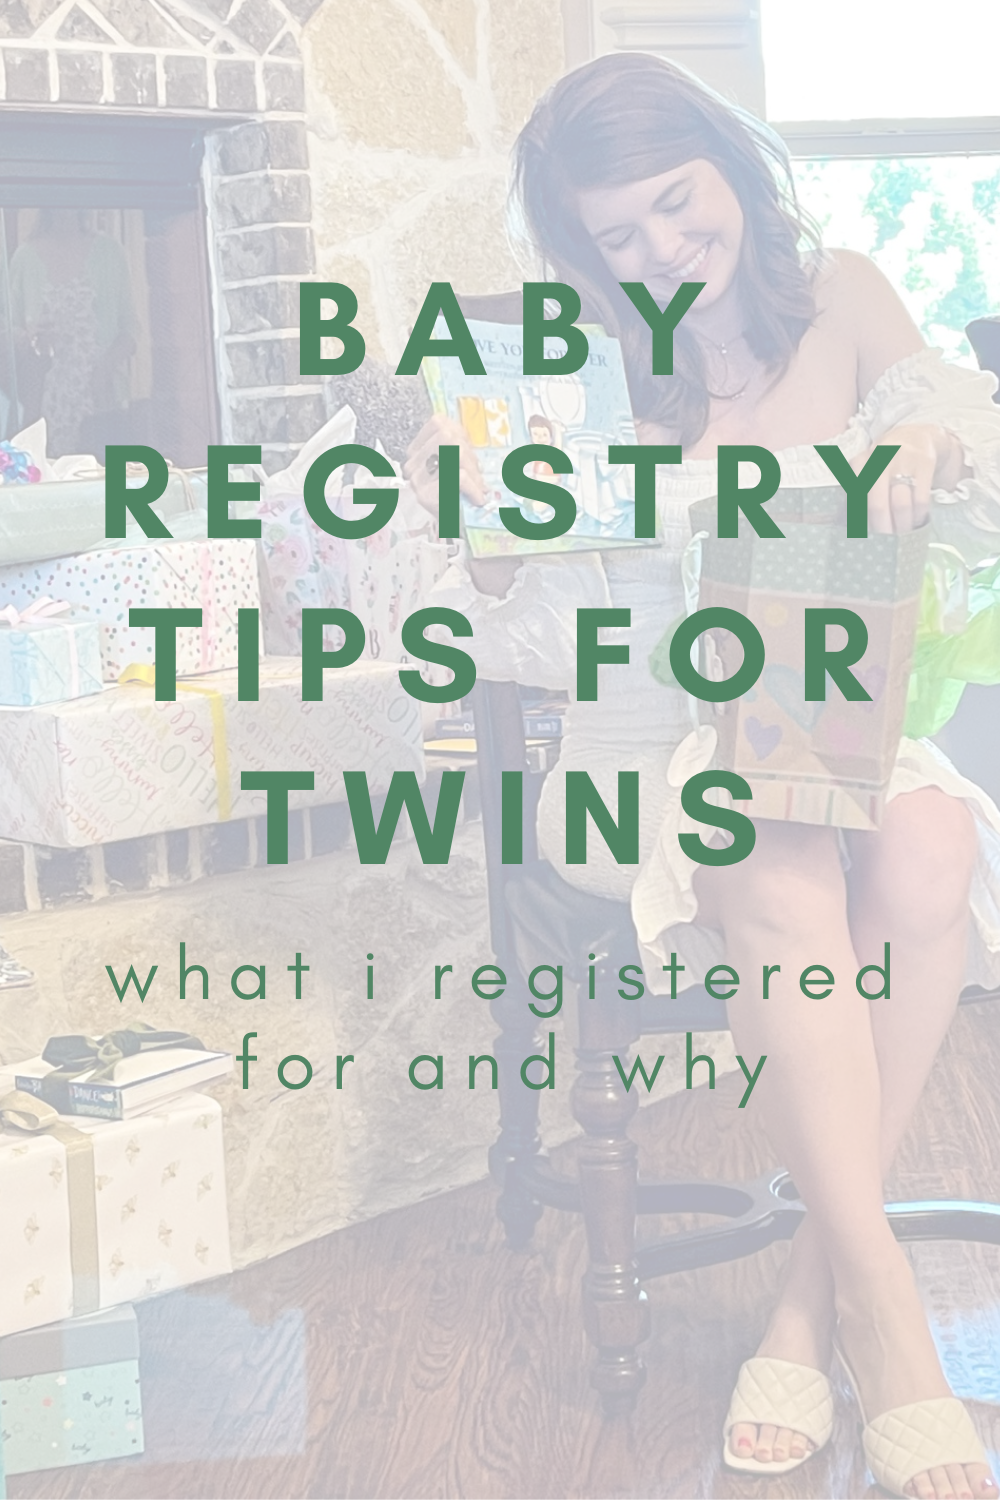 Baby Registry Tips for Twins, lments of style, la blogger, twin mom, twin pregnancy, nontoxic spectrum green clean natural organic baby registry items, what to register for, di di twins, boy girl twins